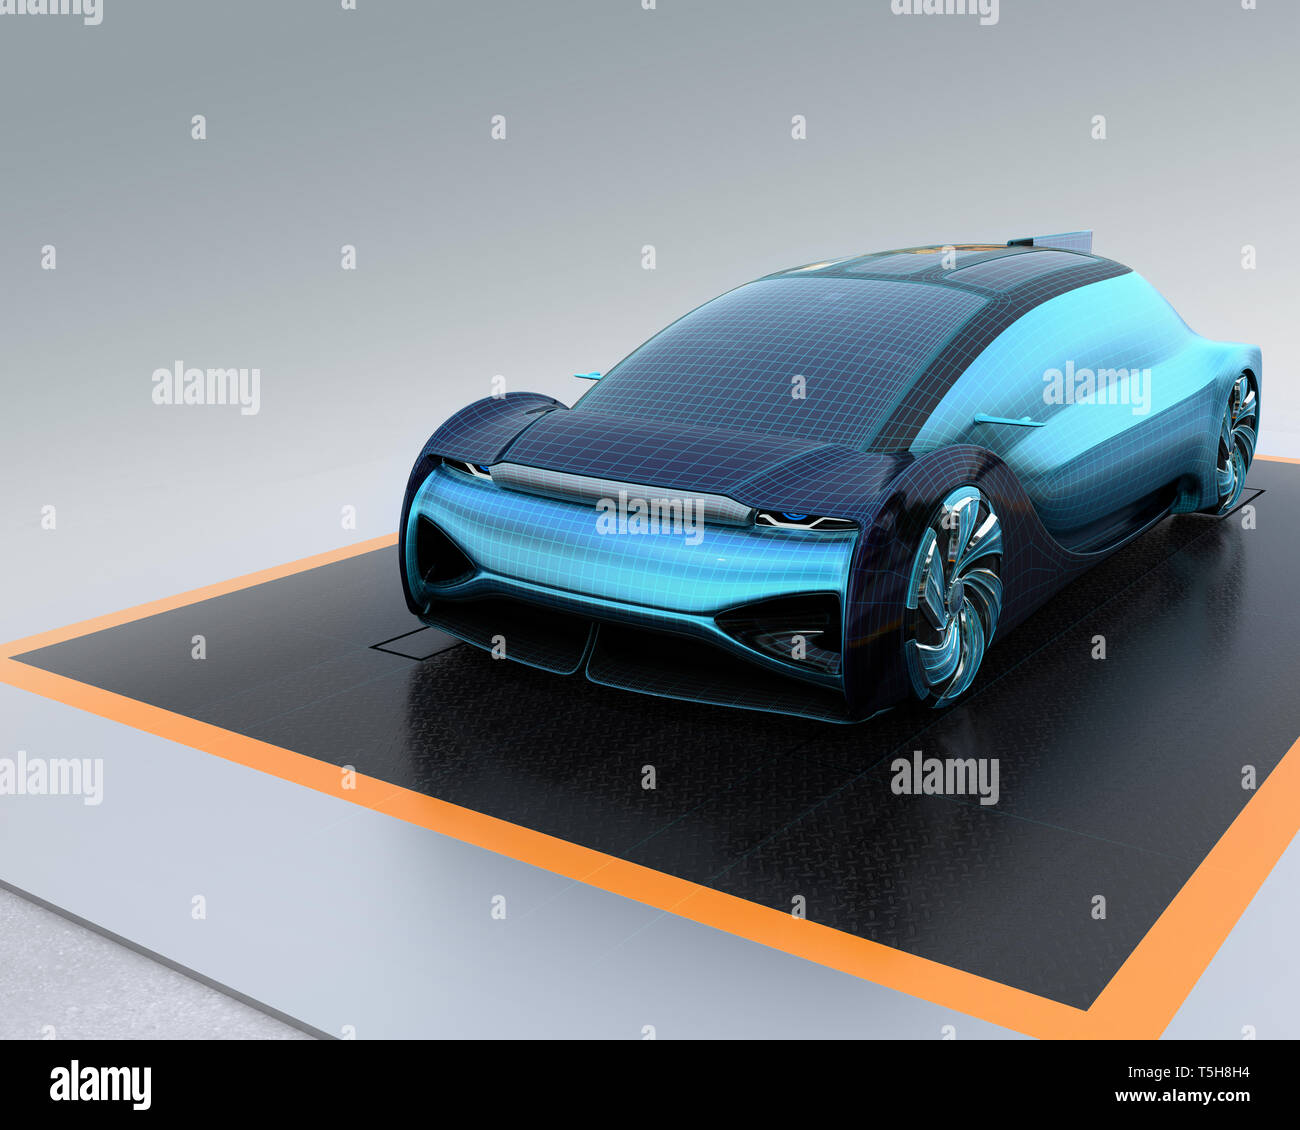 Wireframe rendering of autonomous electric car on black background. Digital Twin concept.  3D rendering image. Stock Photo